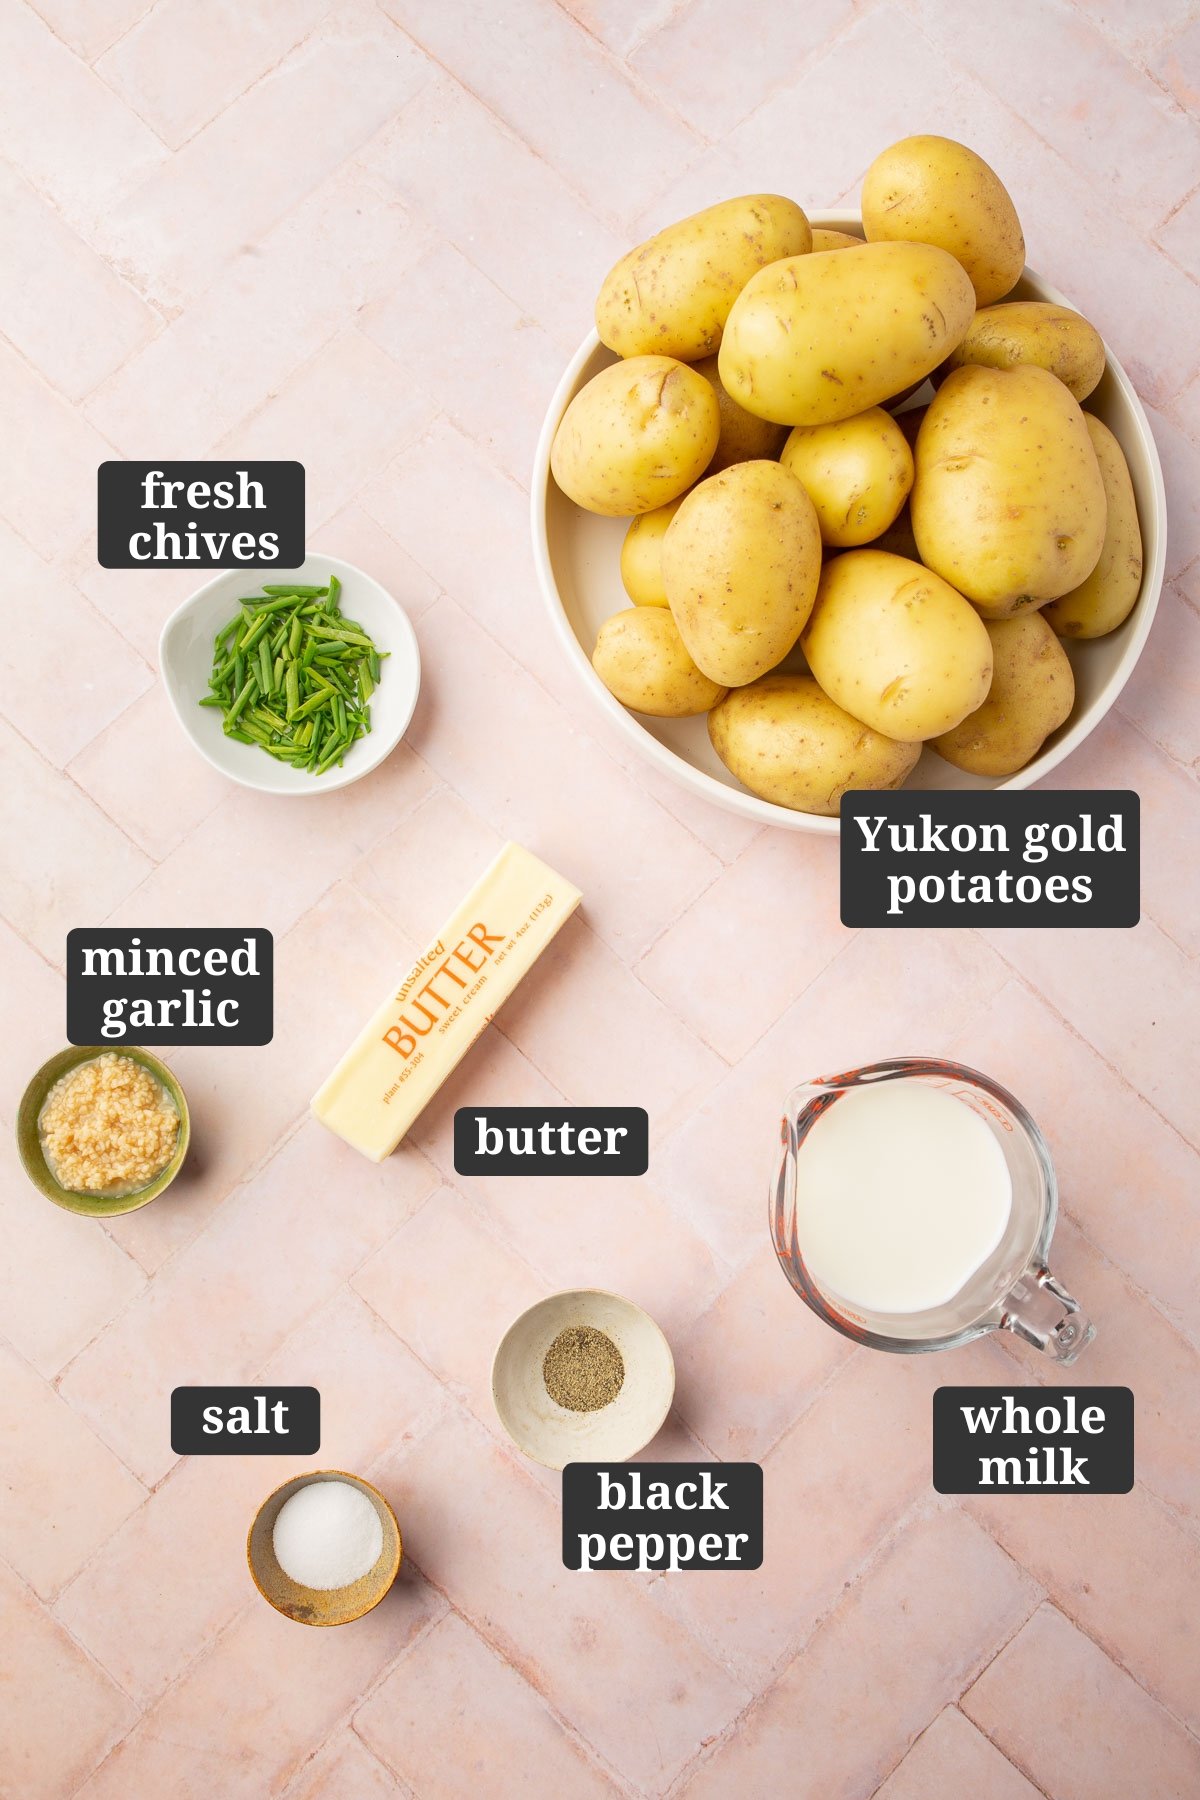 Ingredients in small bowls to make gluten-free mashed potatoes, including fresh chives, yukon gold potatoes, minced garlic, butter, salt, black pepper and milk with text overlays over each ingredient.